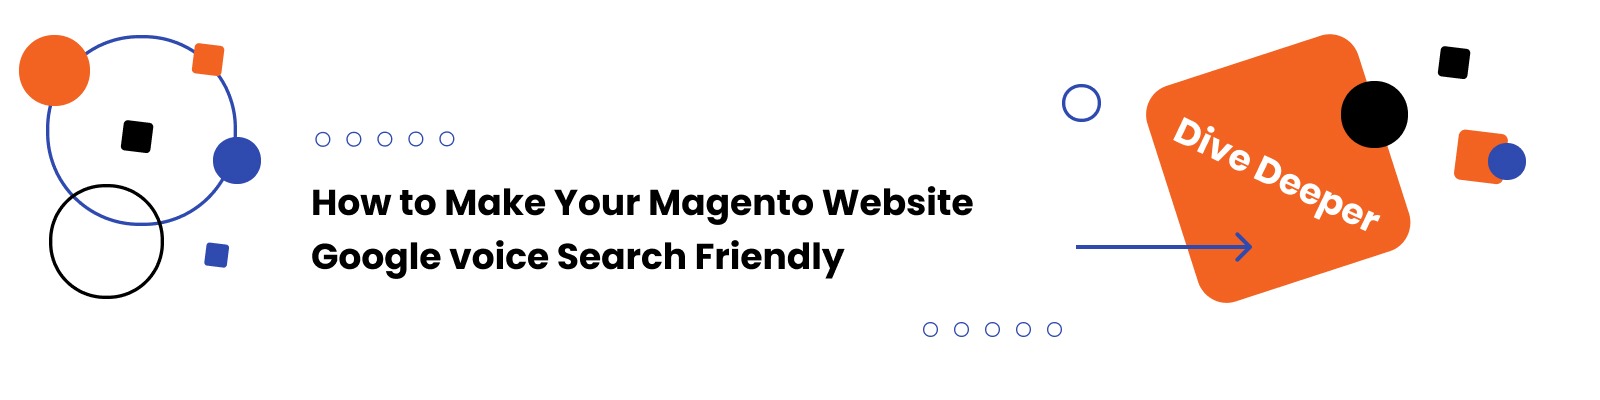 How to Make Your Magento Website Google voice Search Friendly